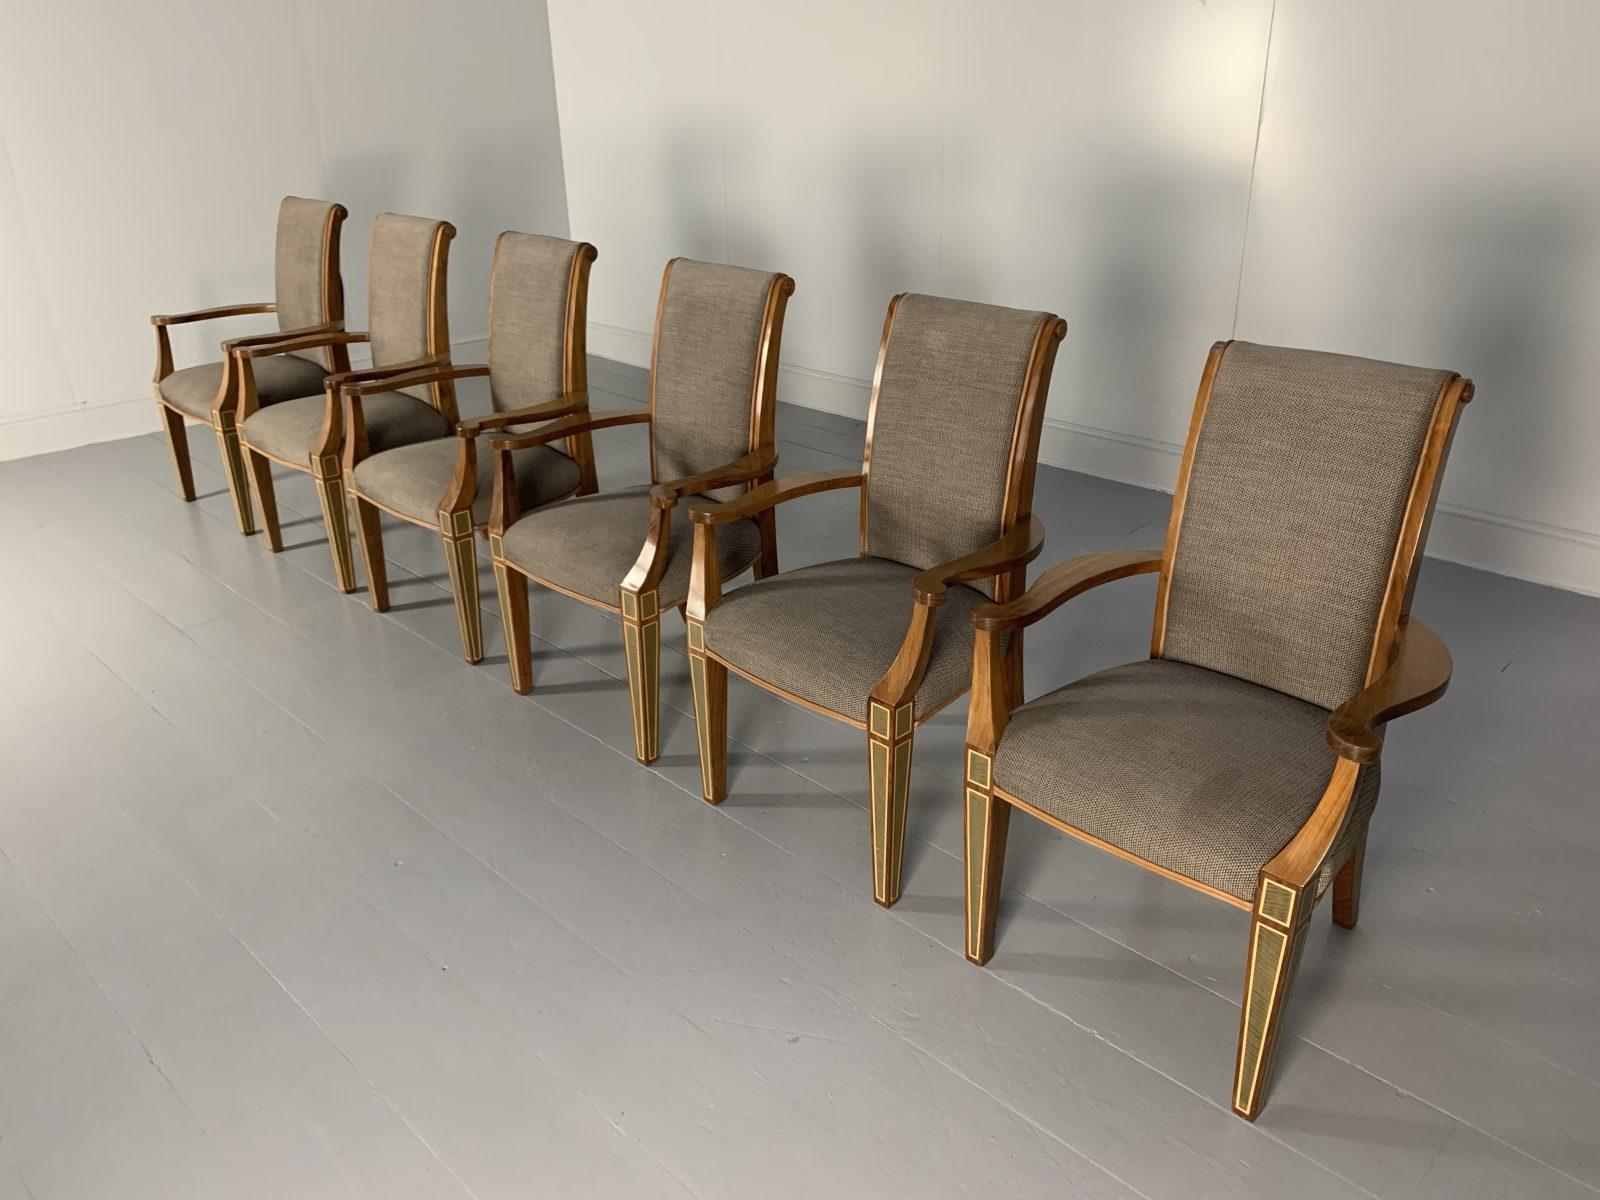 Contemporary 6 Linley “Carver” Dining Chairs, in Woven Fabric & Leather